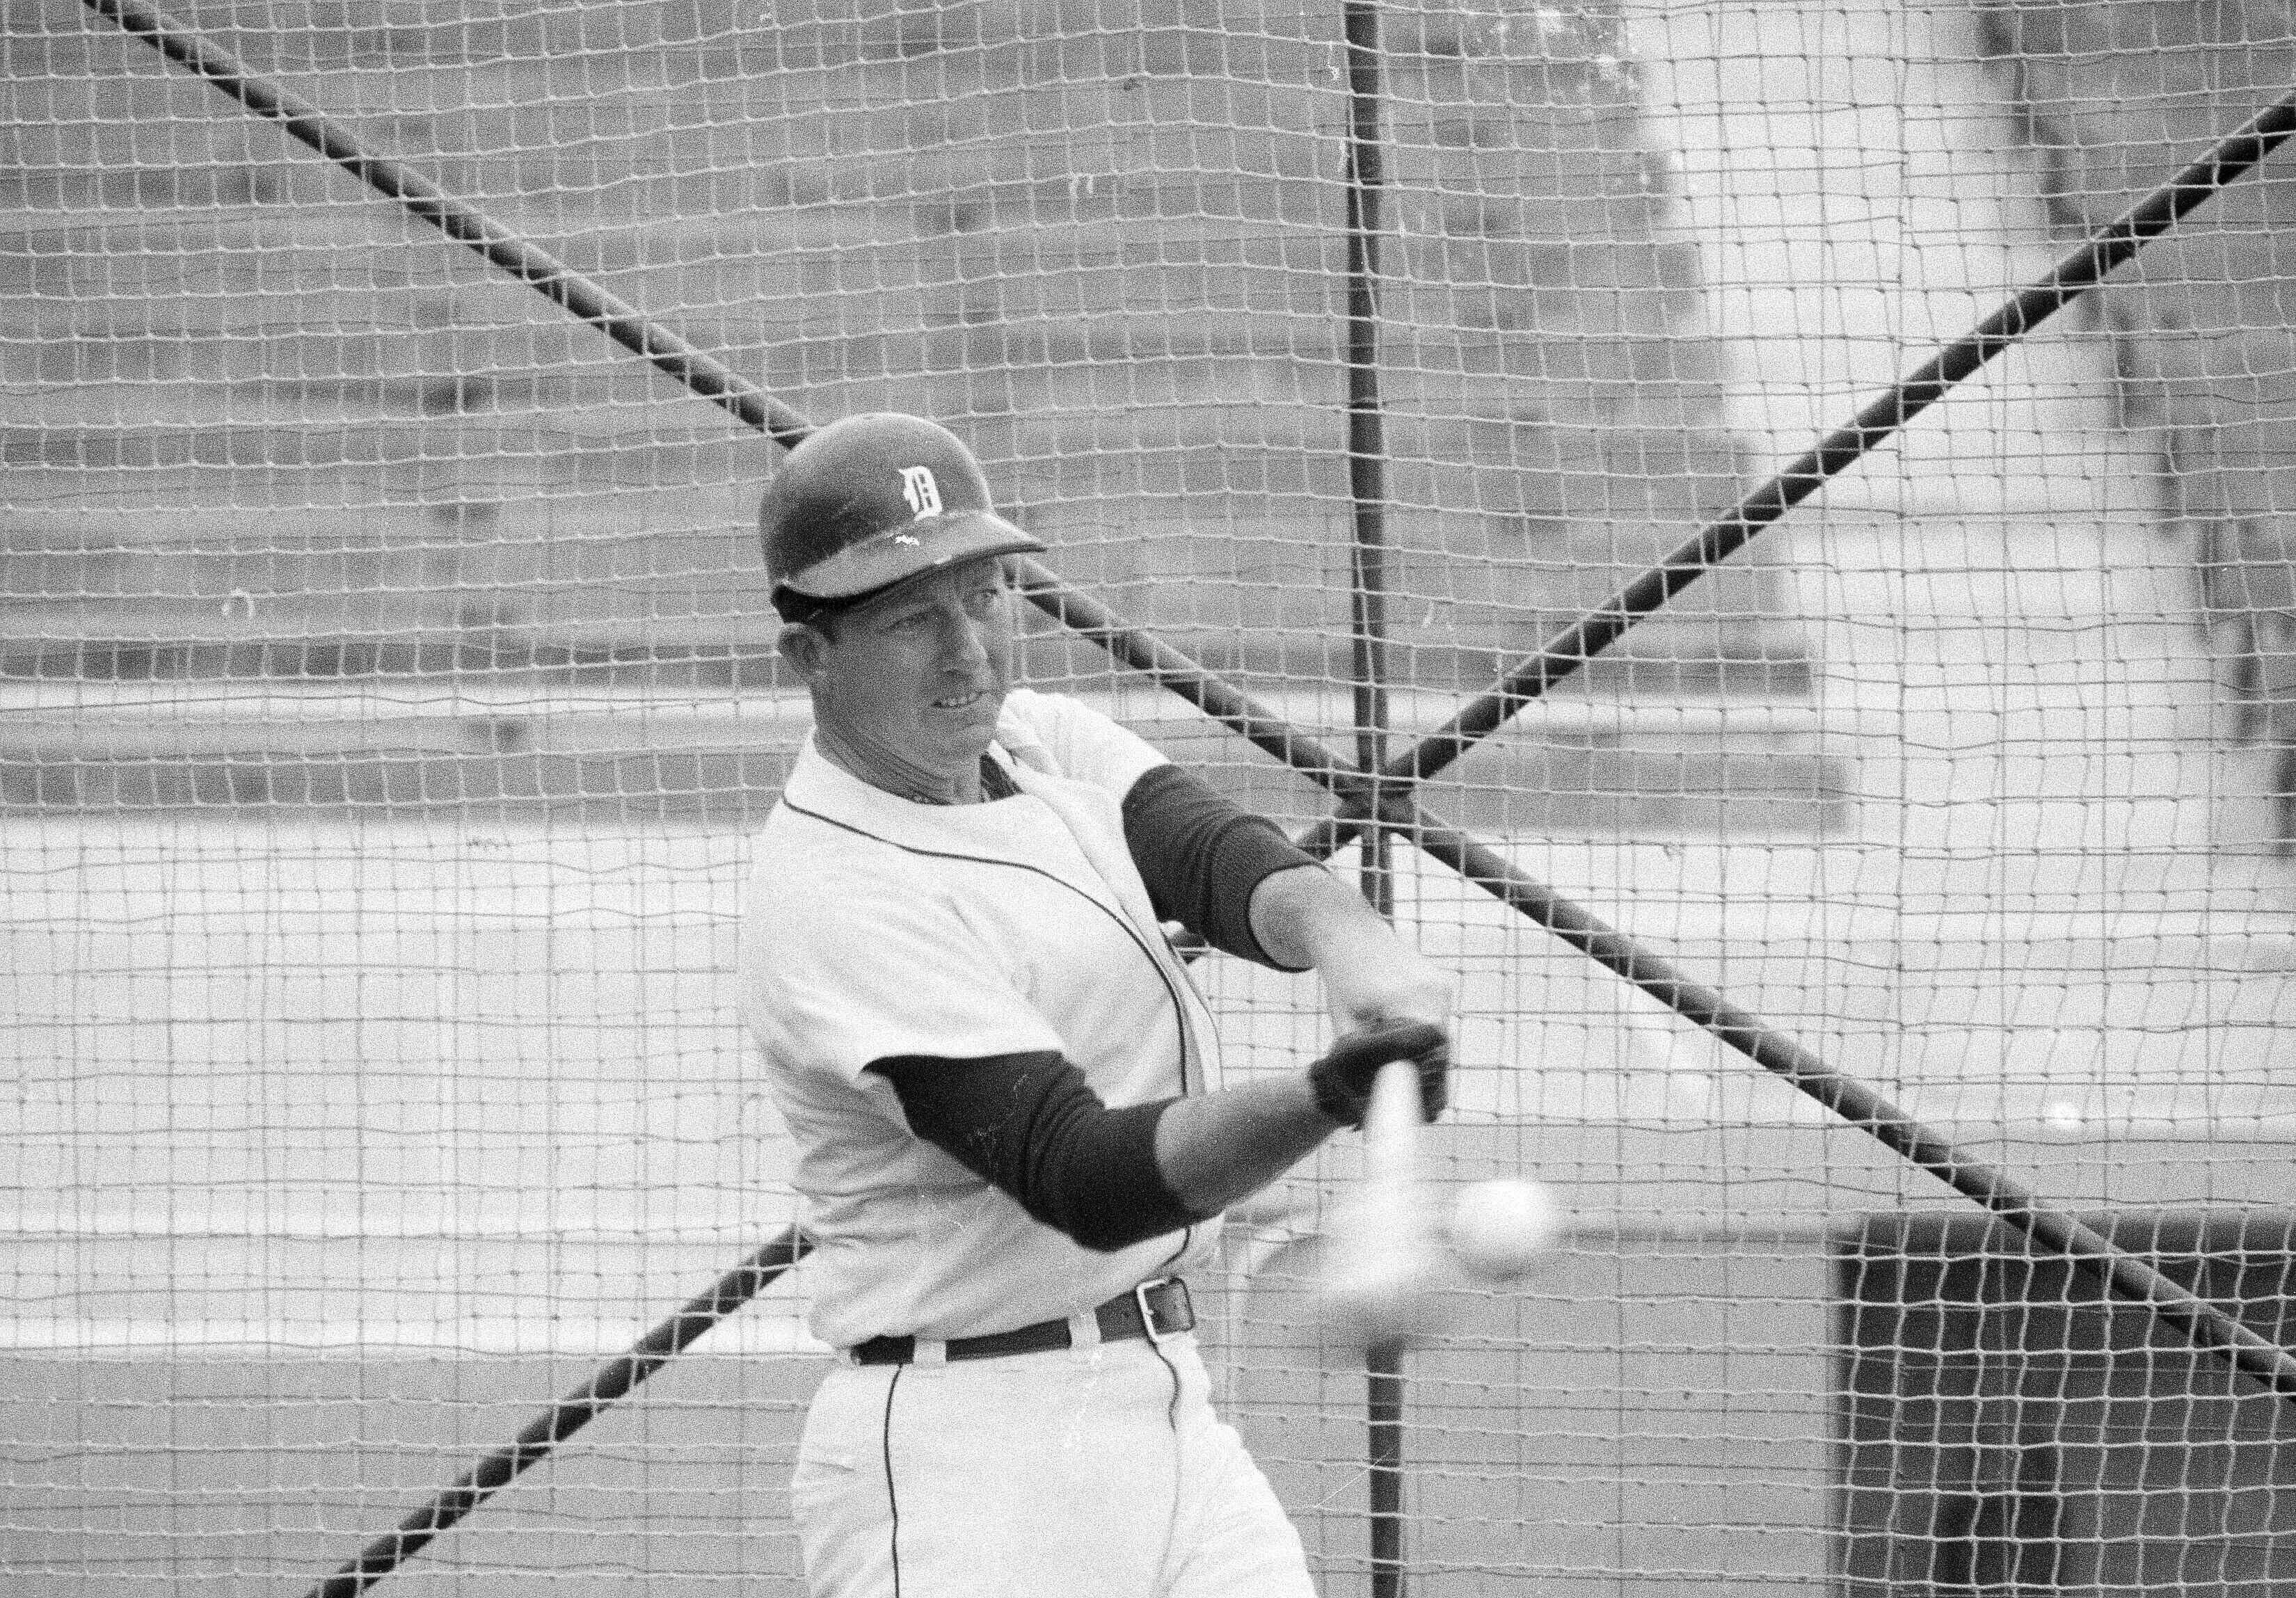 Detroit Tigers outfielder Al Kaline connects with the ball as he takes batting practice at the first day of spring training for the Tigers at Lakeland, Fla., Feb. 24, 1968. Kaline hammered out 25 home runs last season and hit .308. He was bothered with a fractured hand during part of the season and appeared in only 131 games.